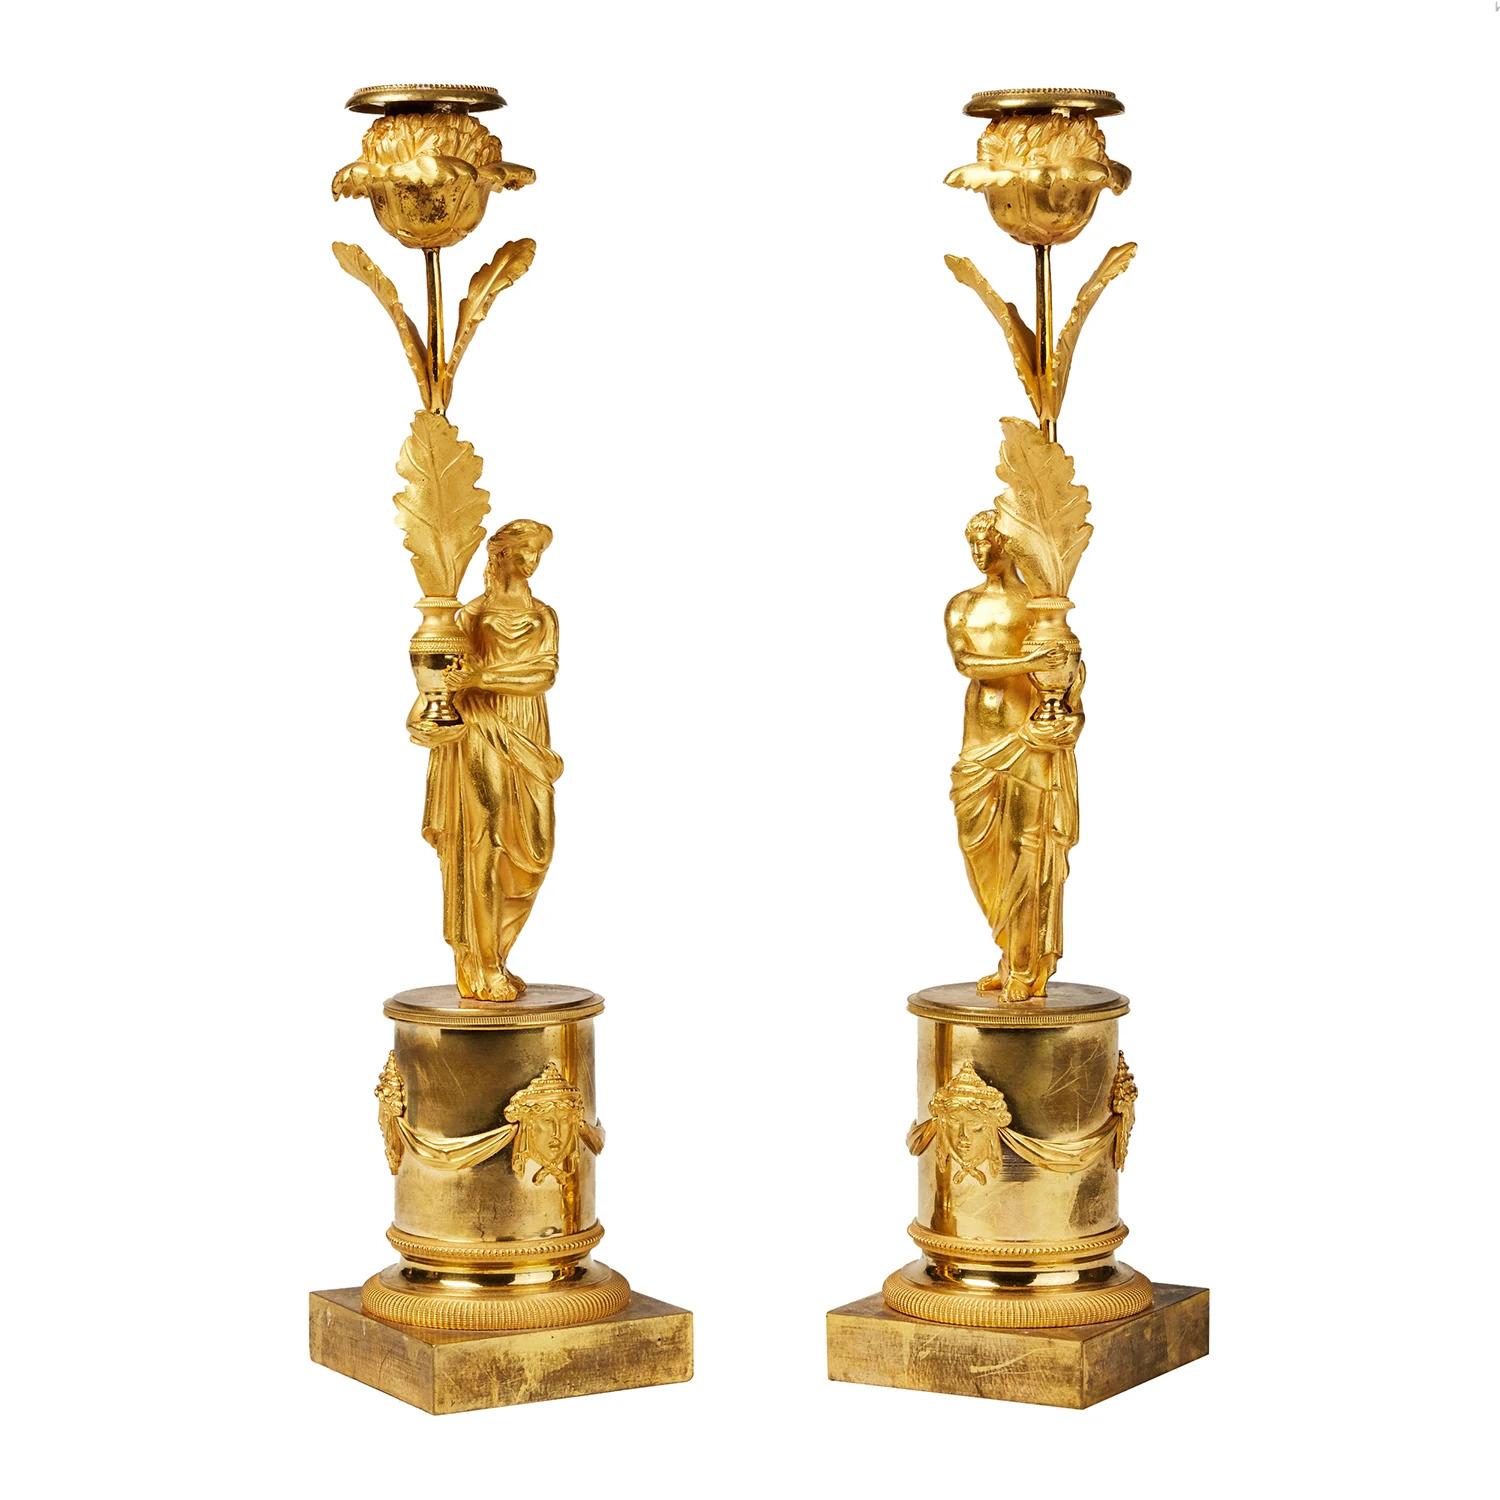 A gold, antique French pair of candle holders made of hand crafted matted and polished burnt gilded bronze, in good condition. Each of the detailed sticks is composed with a face mascarons, a crowned man and woman, carrying a mug with flowers, loose